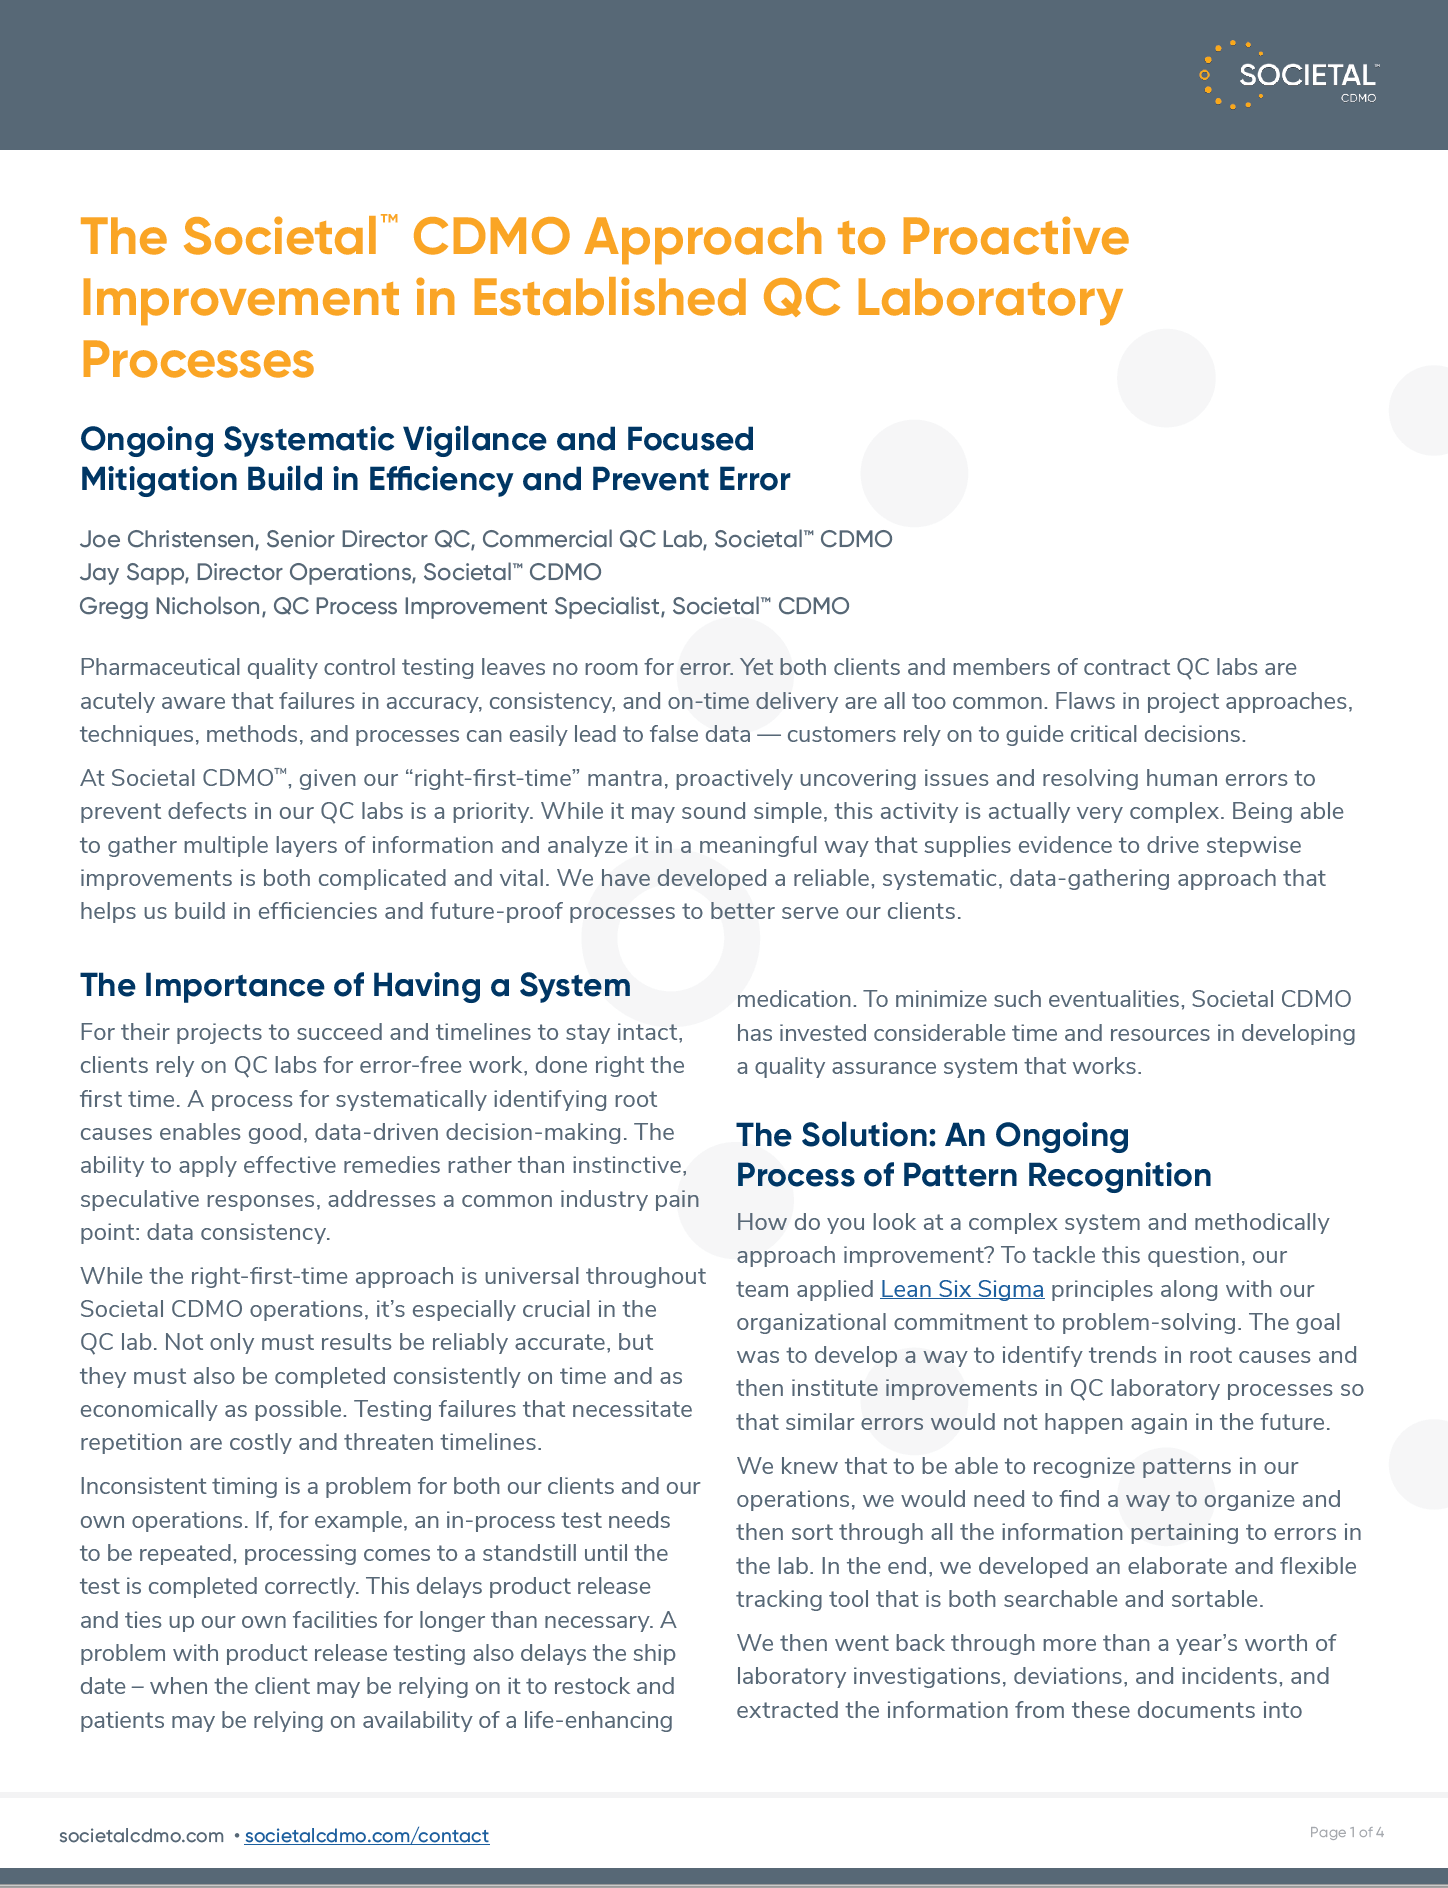 The Societal Approach to Improvement in QC Laboratory Processes White Paper